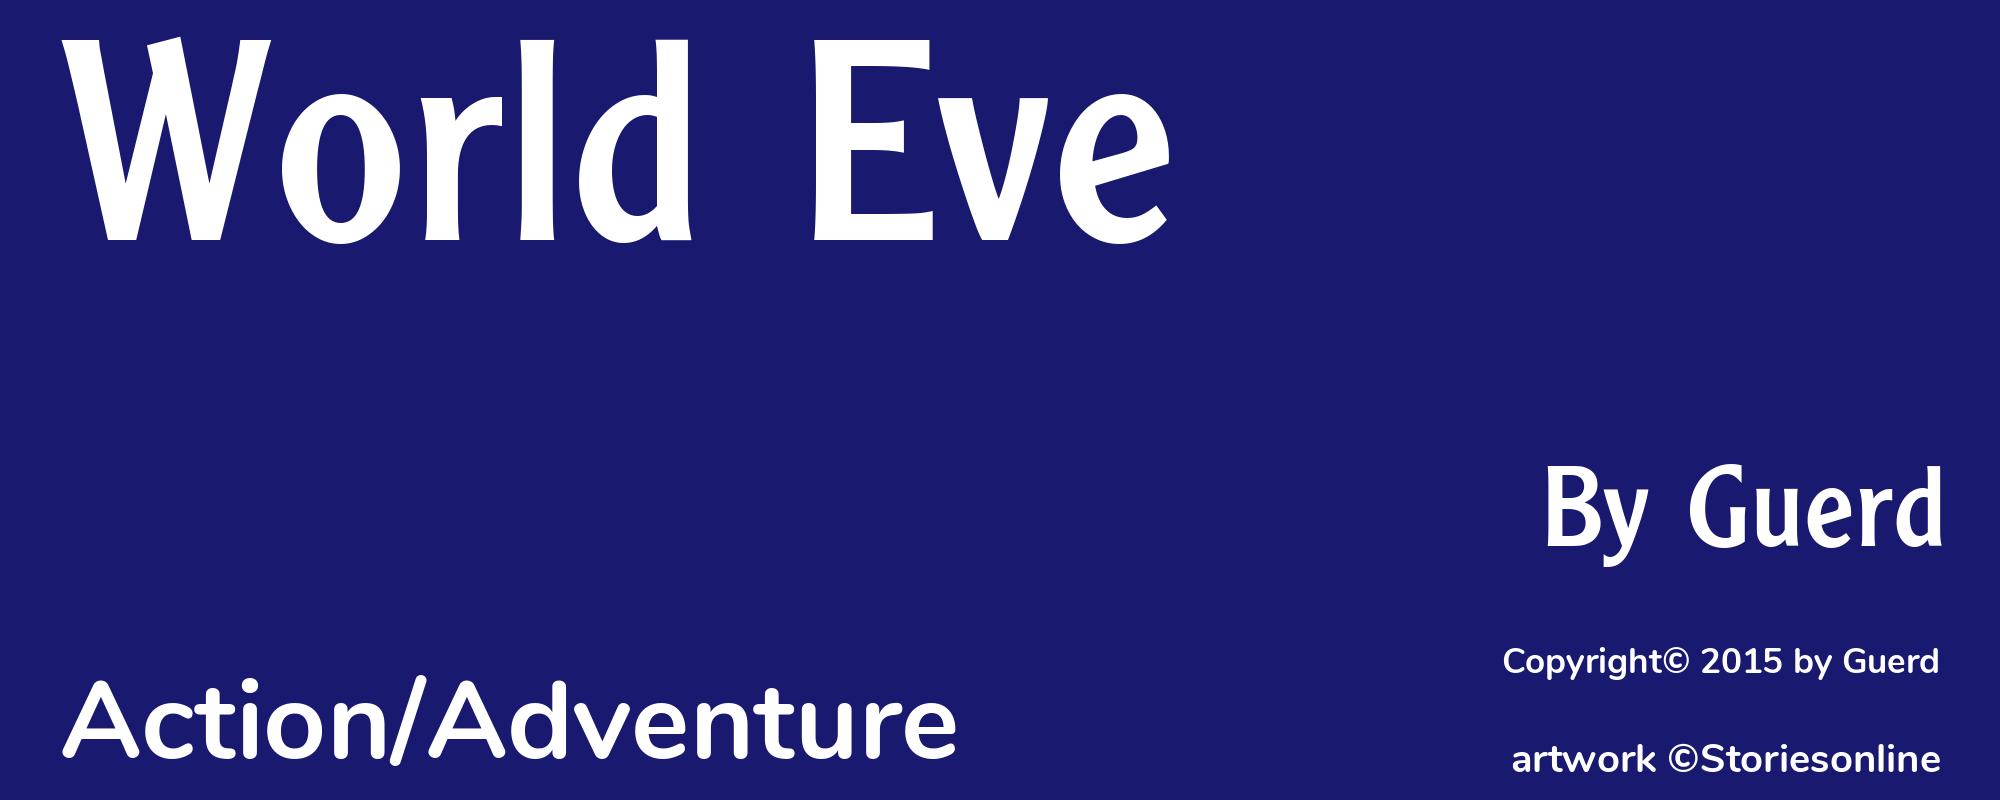 World Eve - Cover